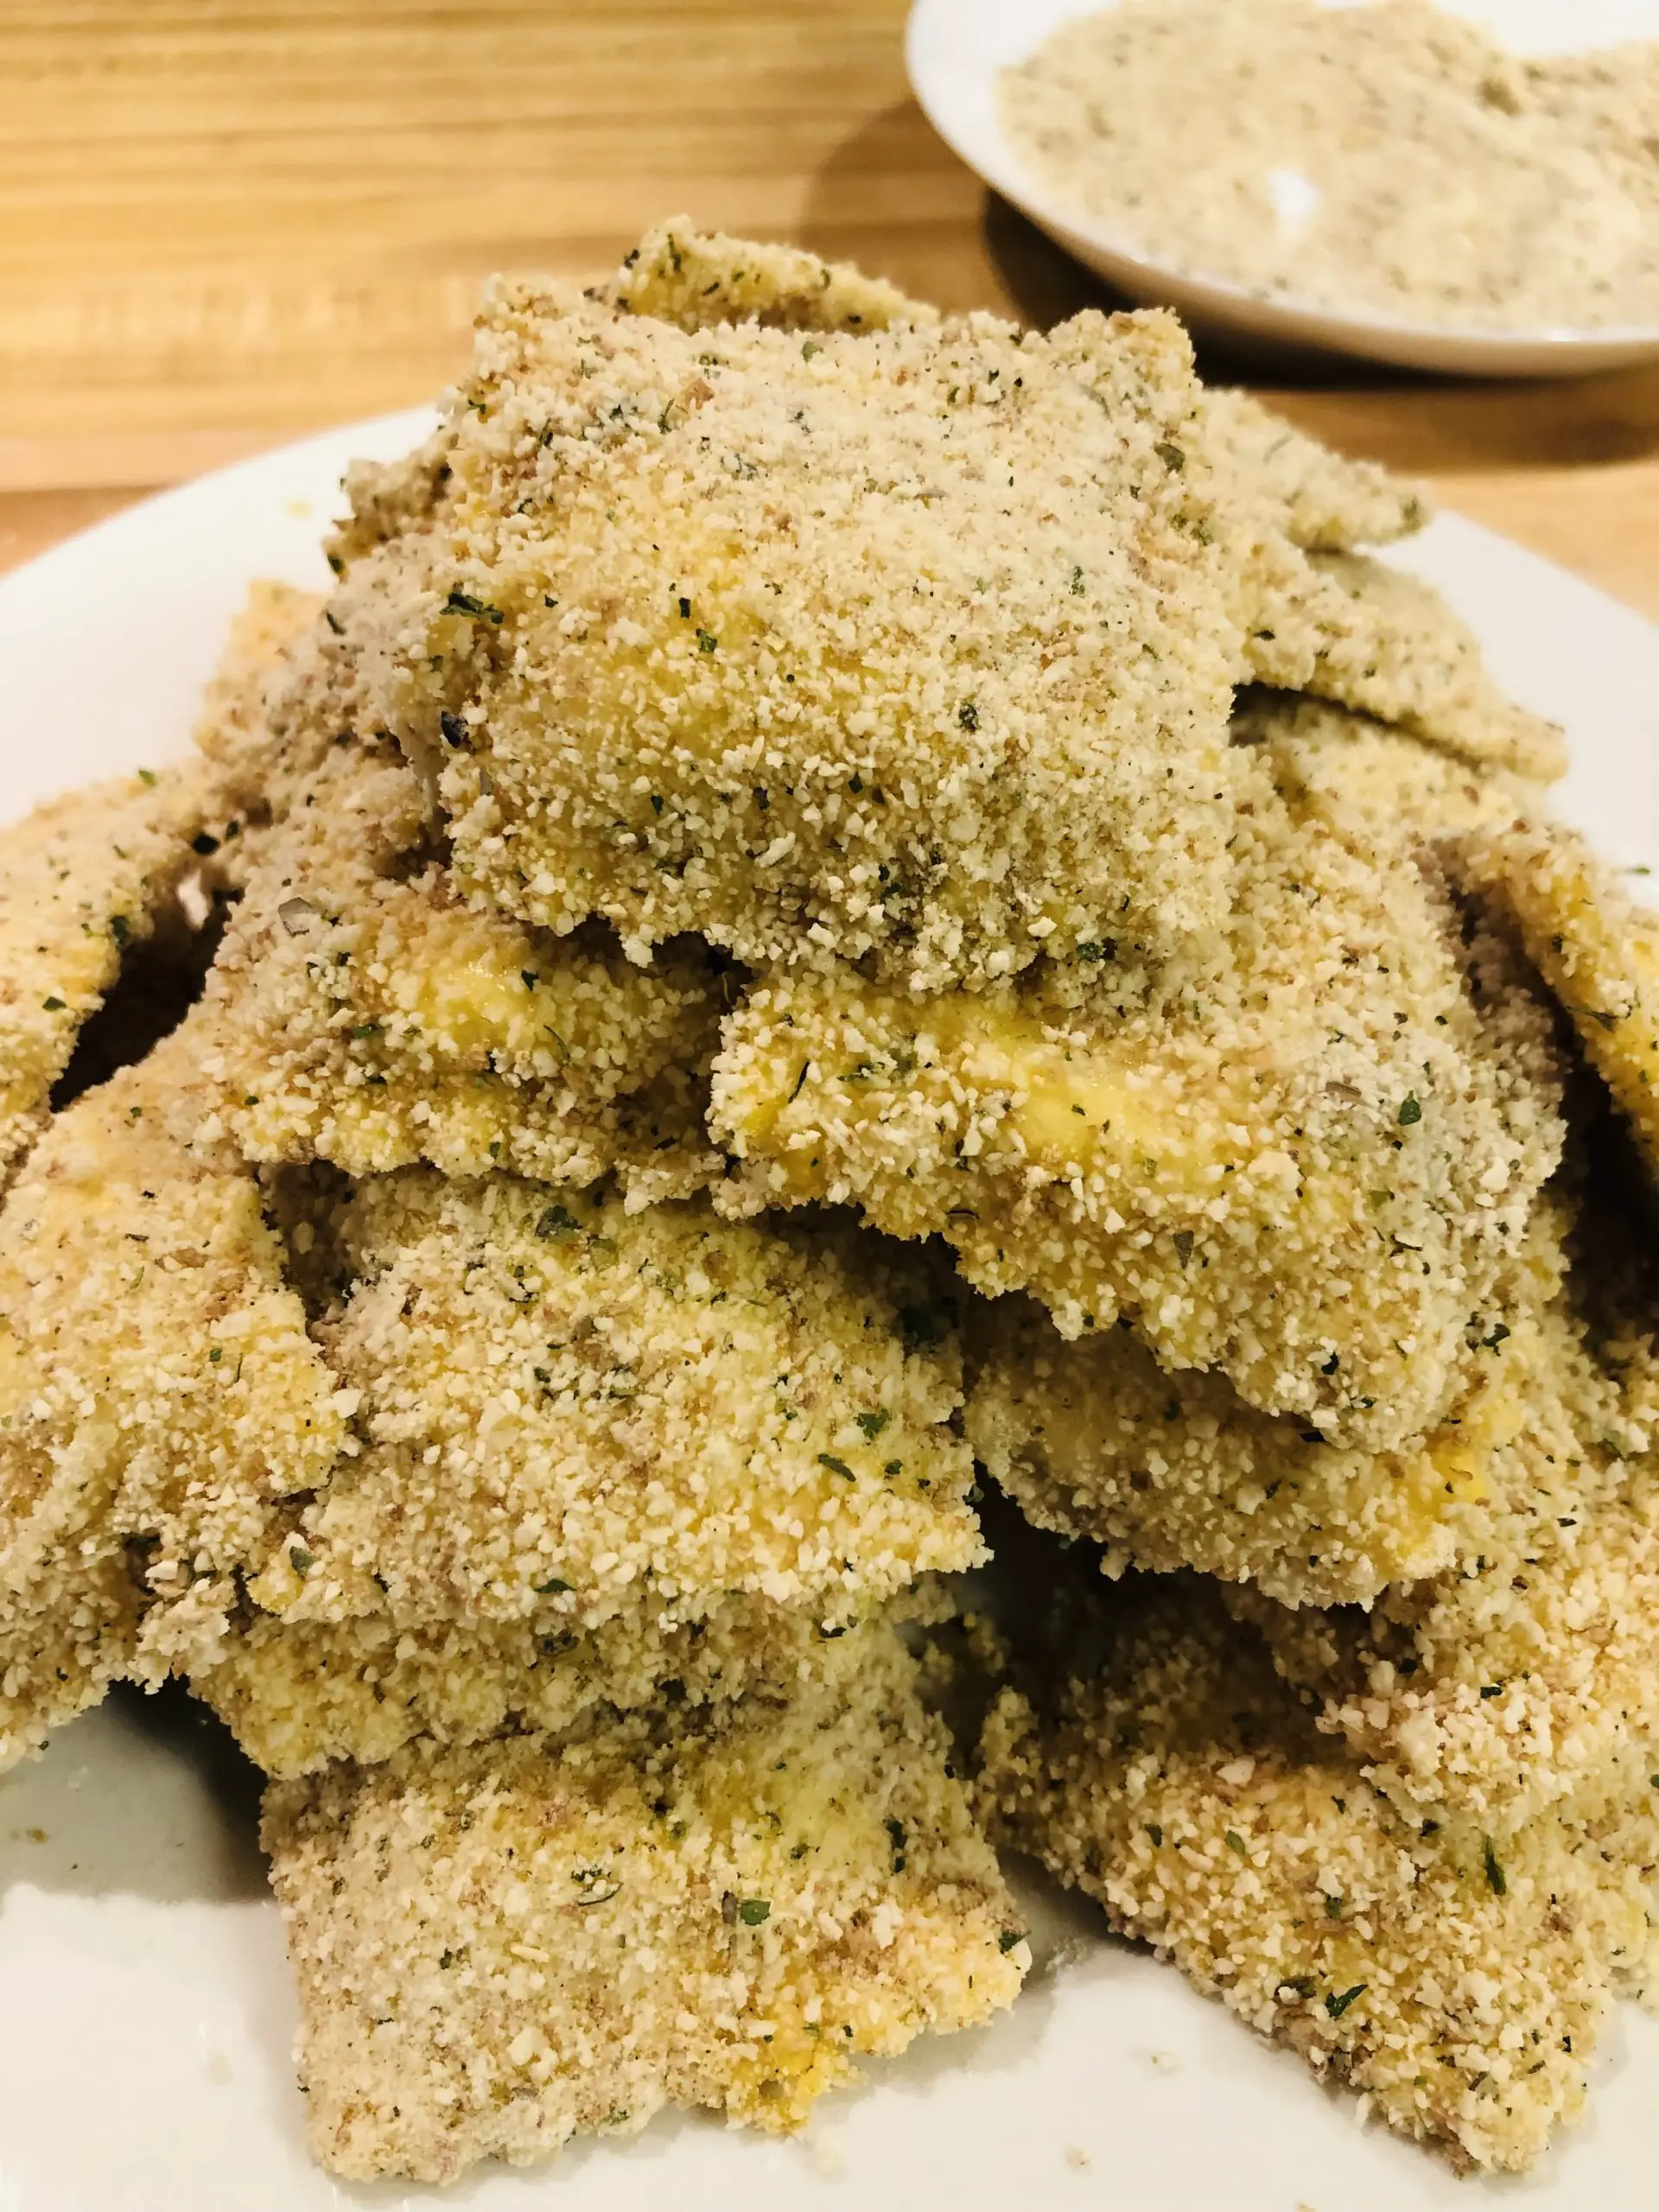 Ravioli which has been dredged in flour, egg, and breadcrumbs on a white plate